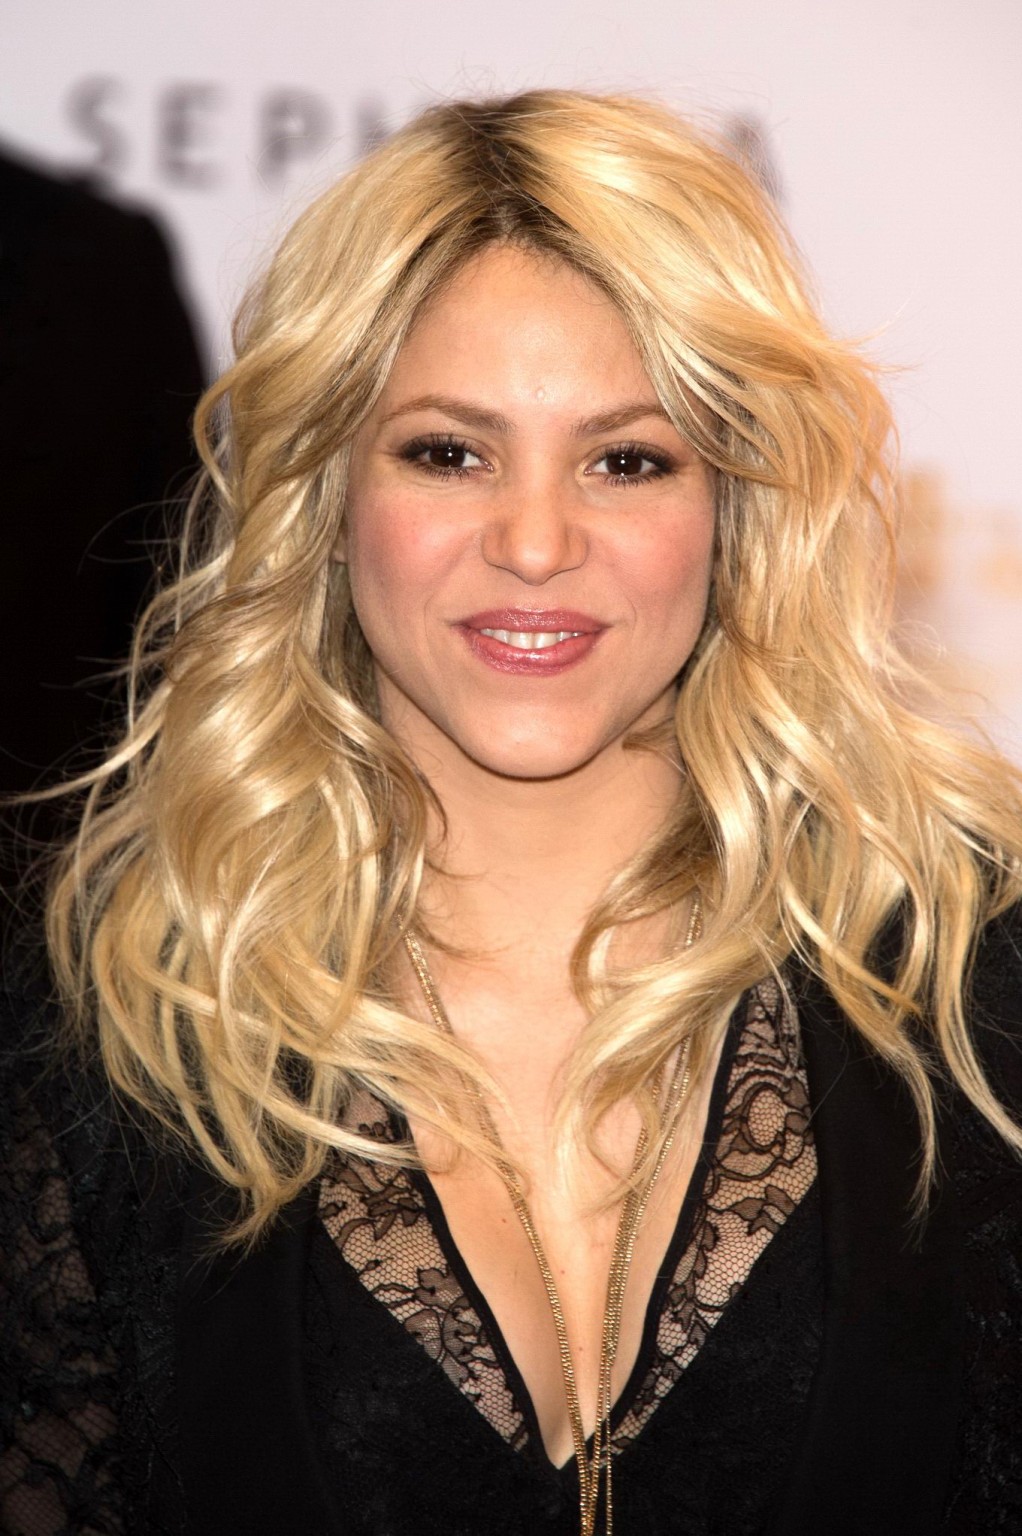 Shakira showing huge cleavage at the 'S by Shakira' perfume launch at Sephora in #75236968